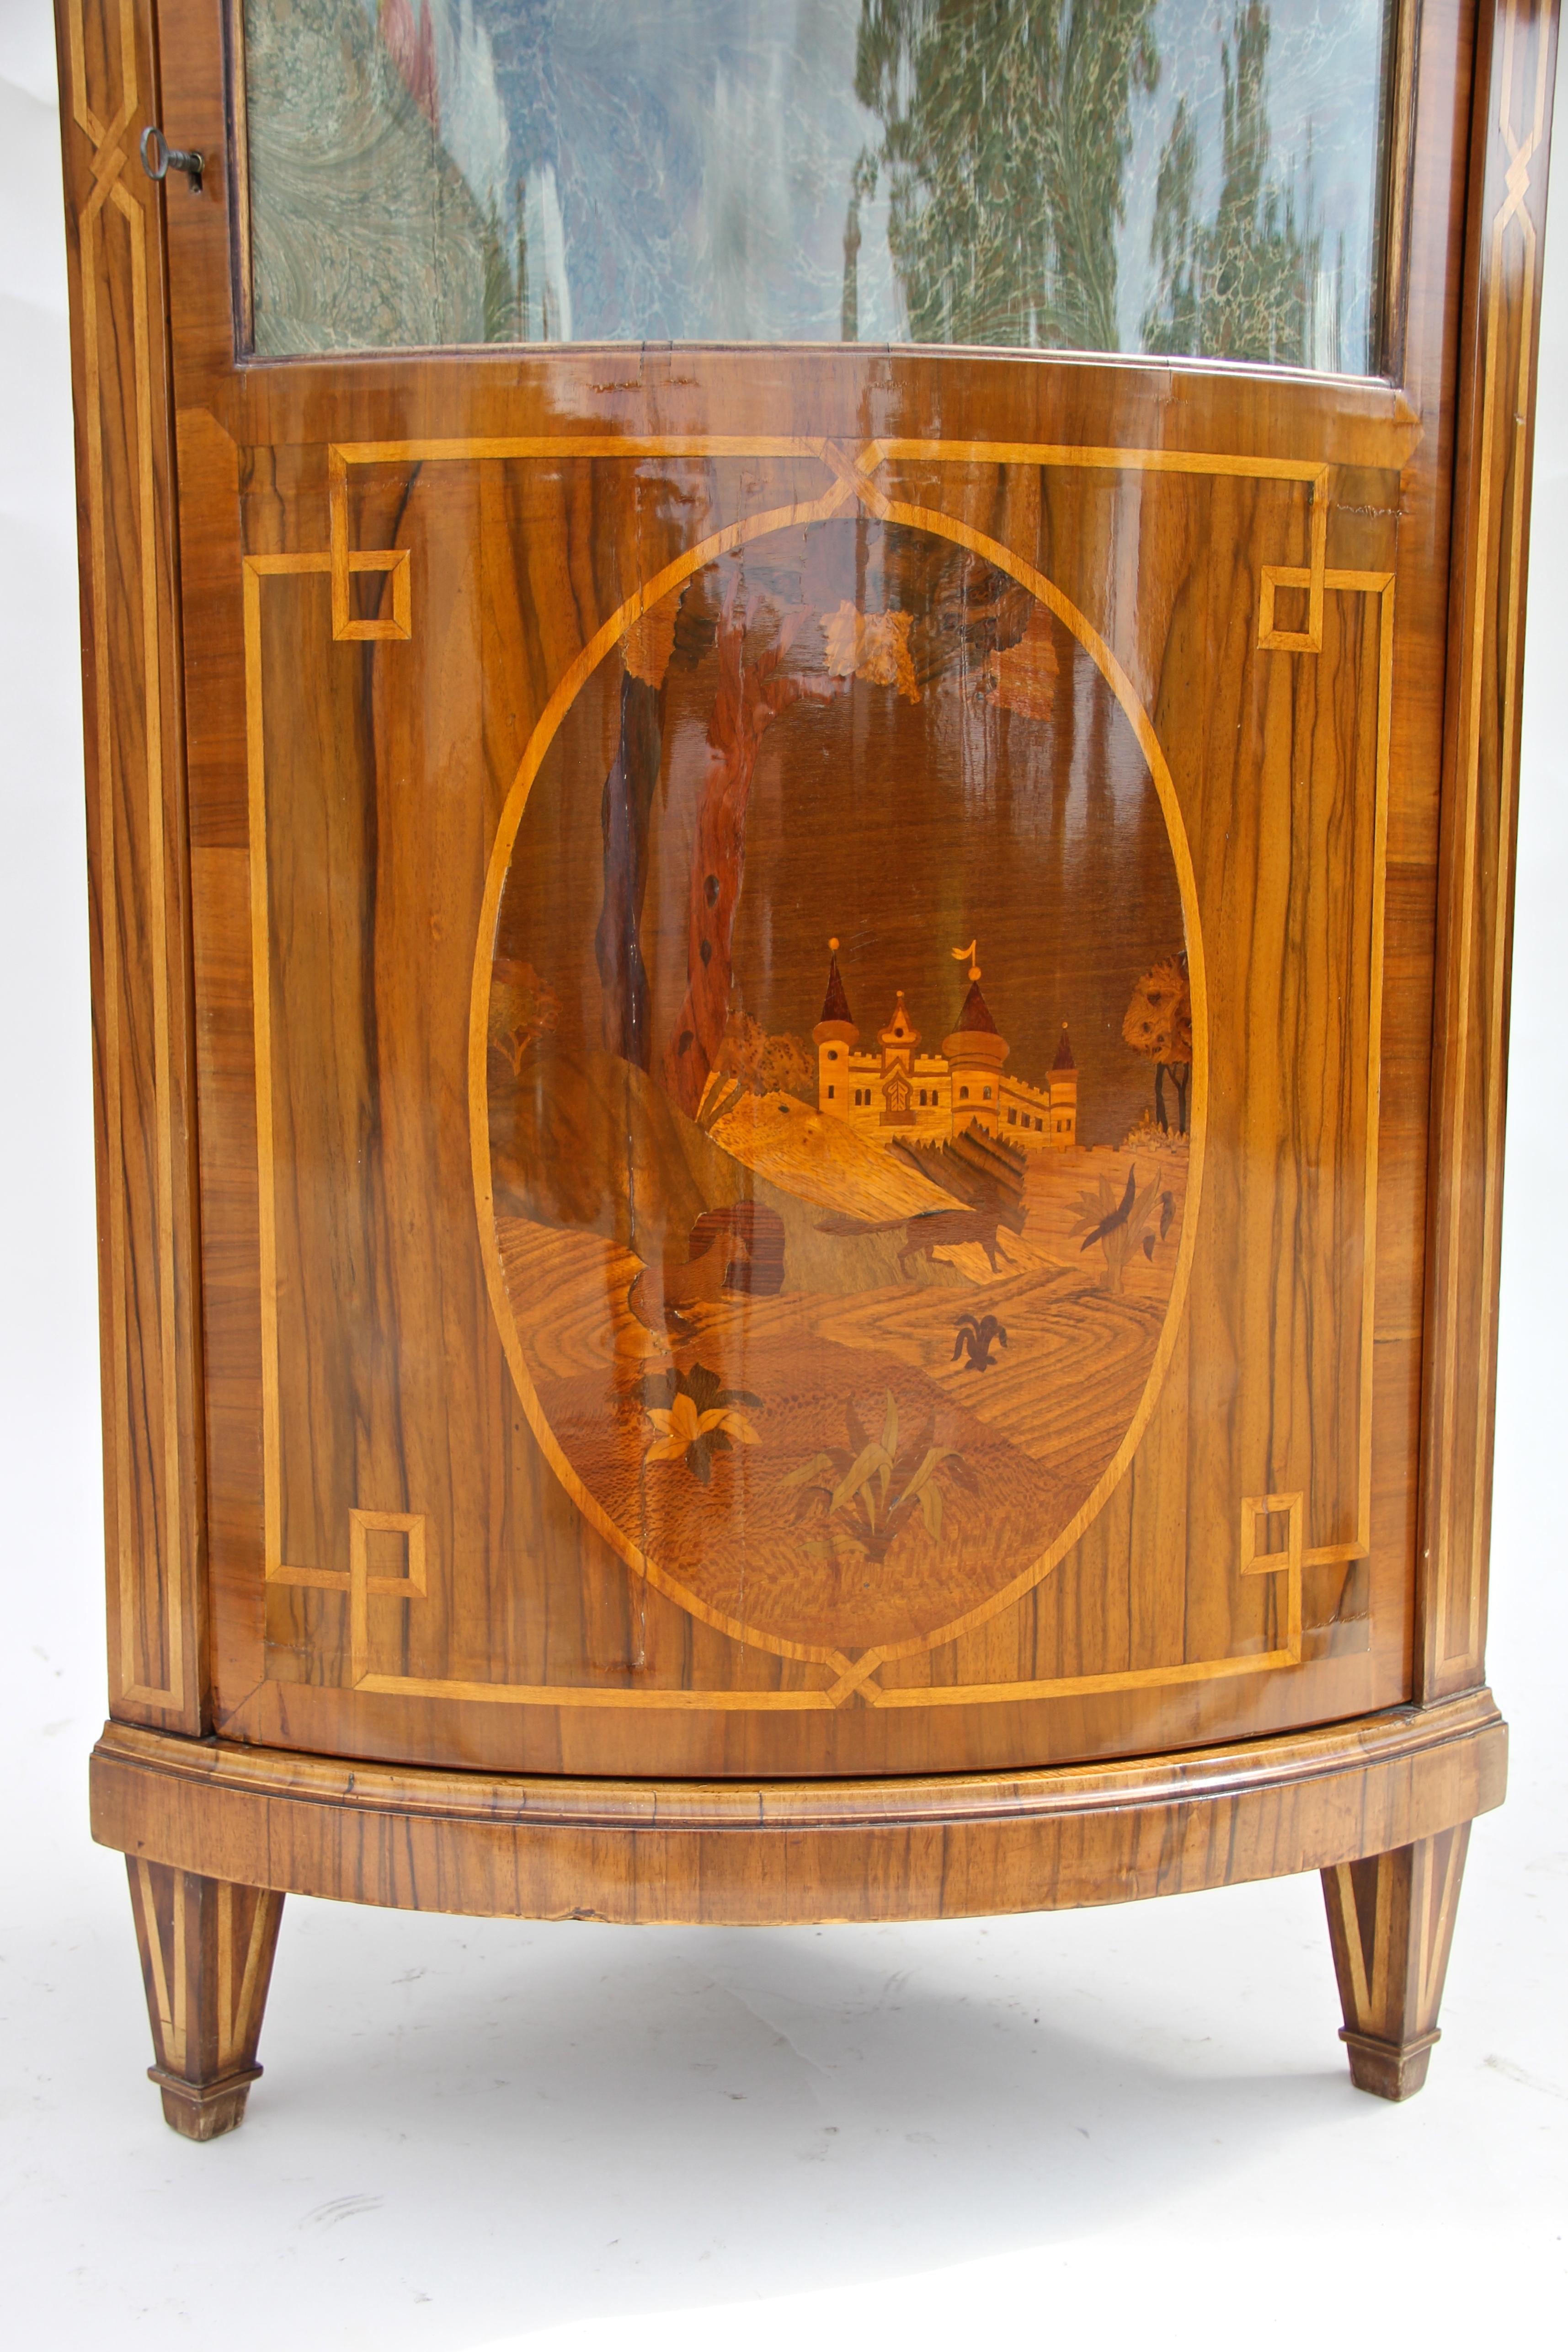 Fantastic Marquetry corner cabinet from the so-called Baroque Revival period circa 1890. This Austrian late 19th century vitrine cabinet shows a wonderful design with a unique curved shape. The front door provides a large curved glass panel, perfect